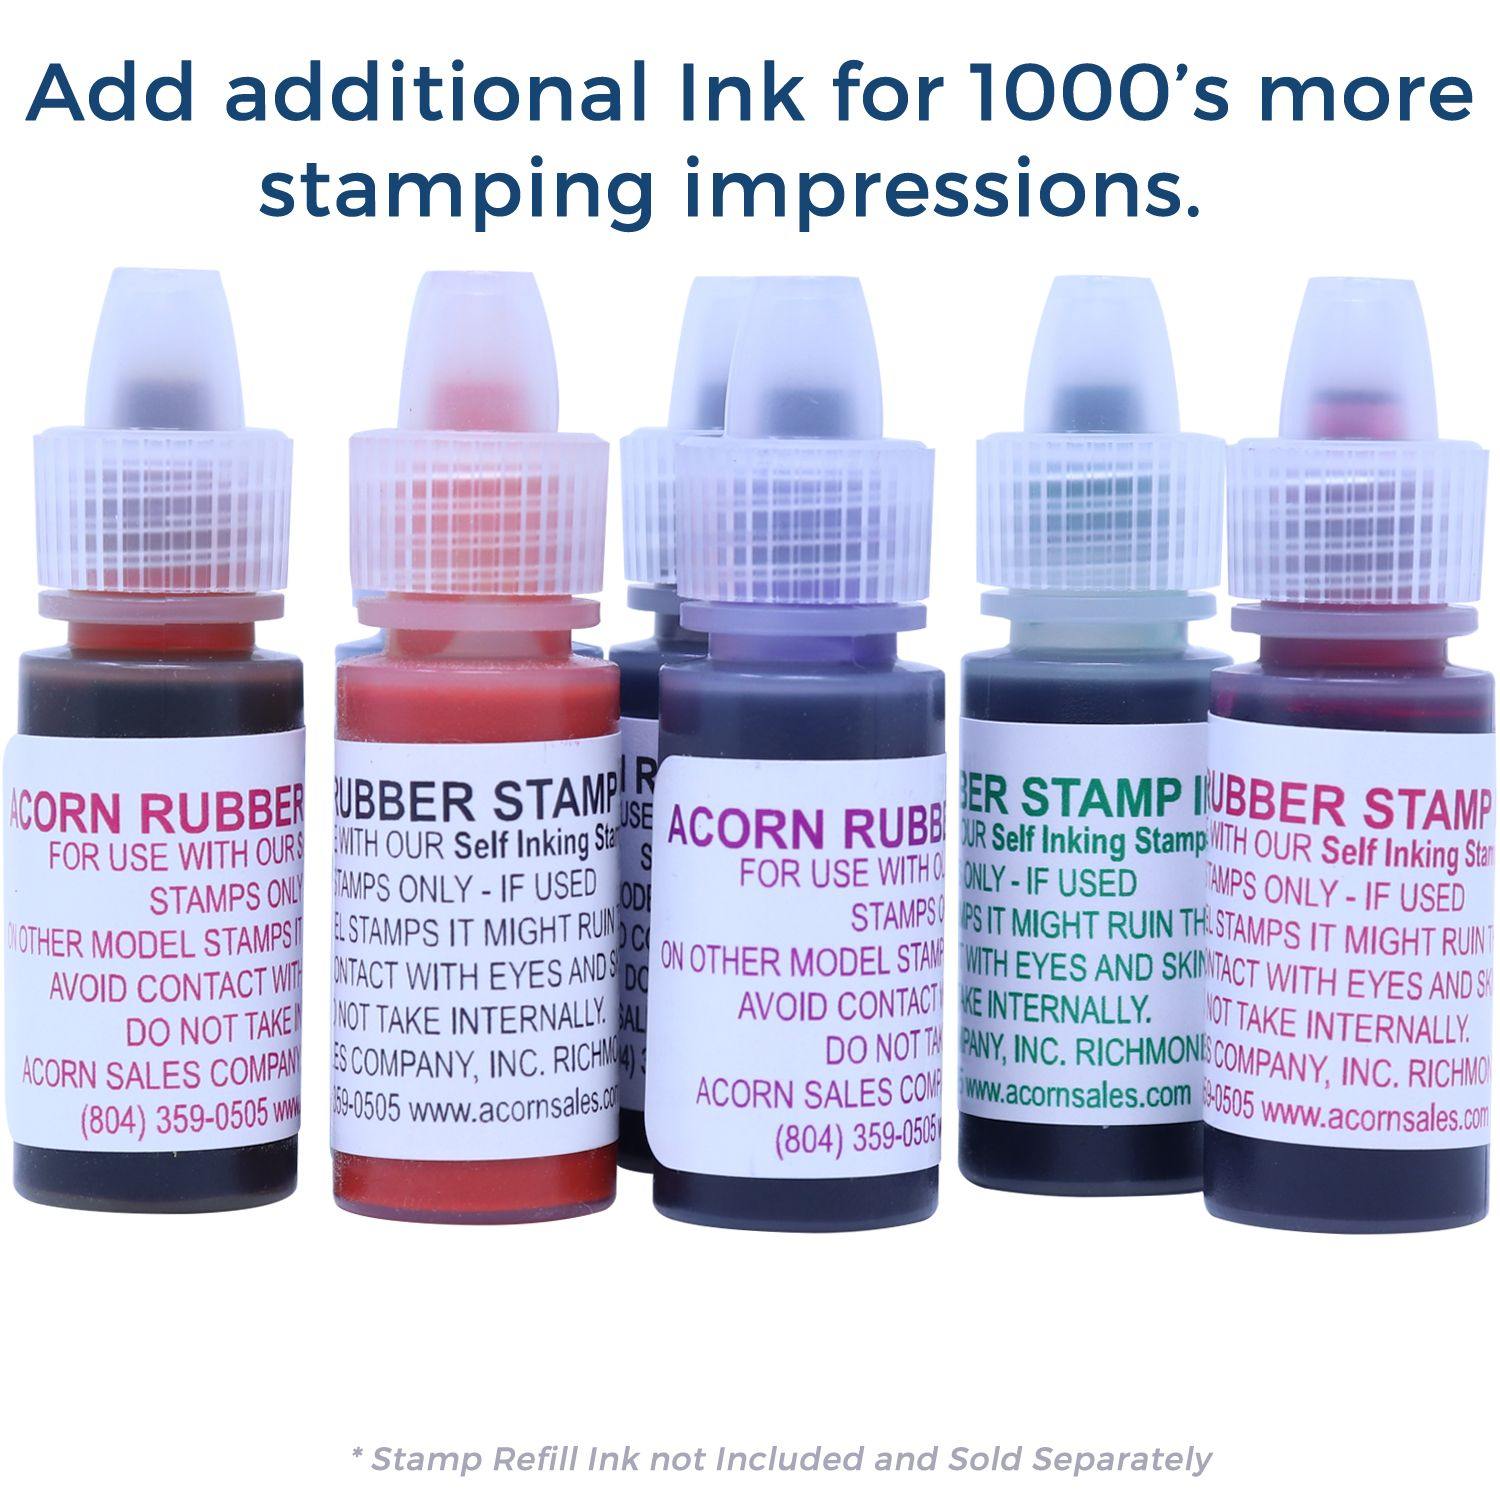 Refill Inks for Slim Pre-Inked Times Faxed Stamp Available